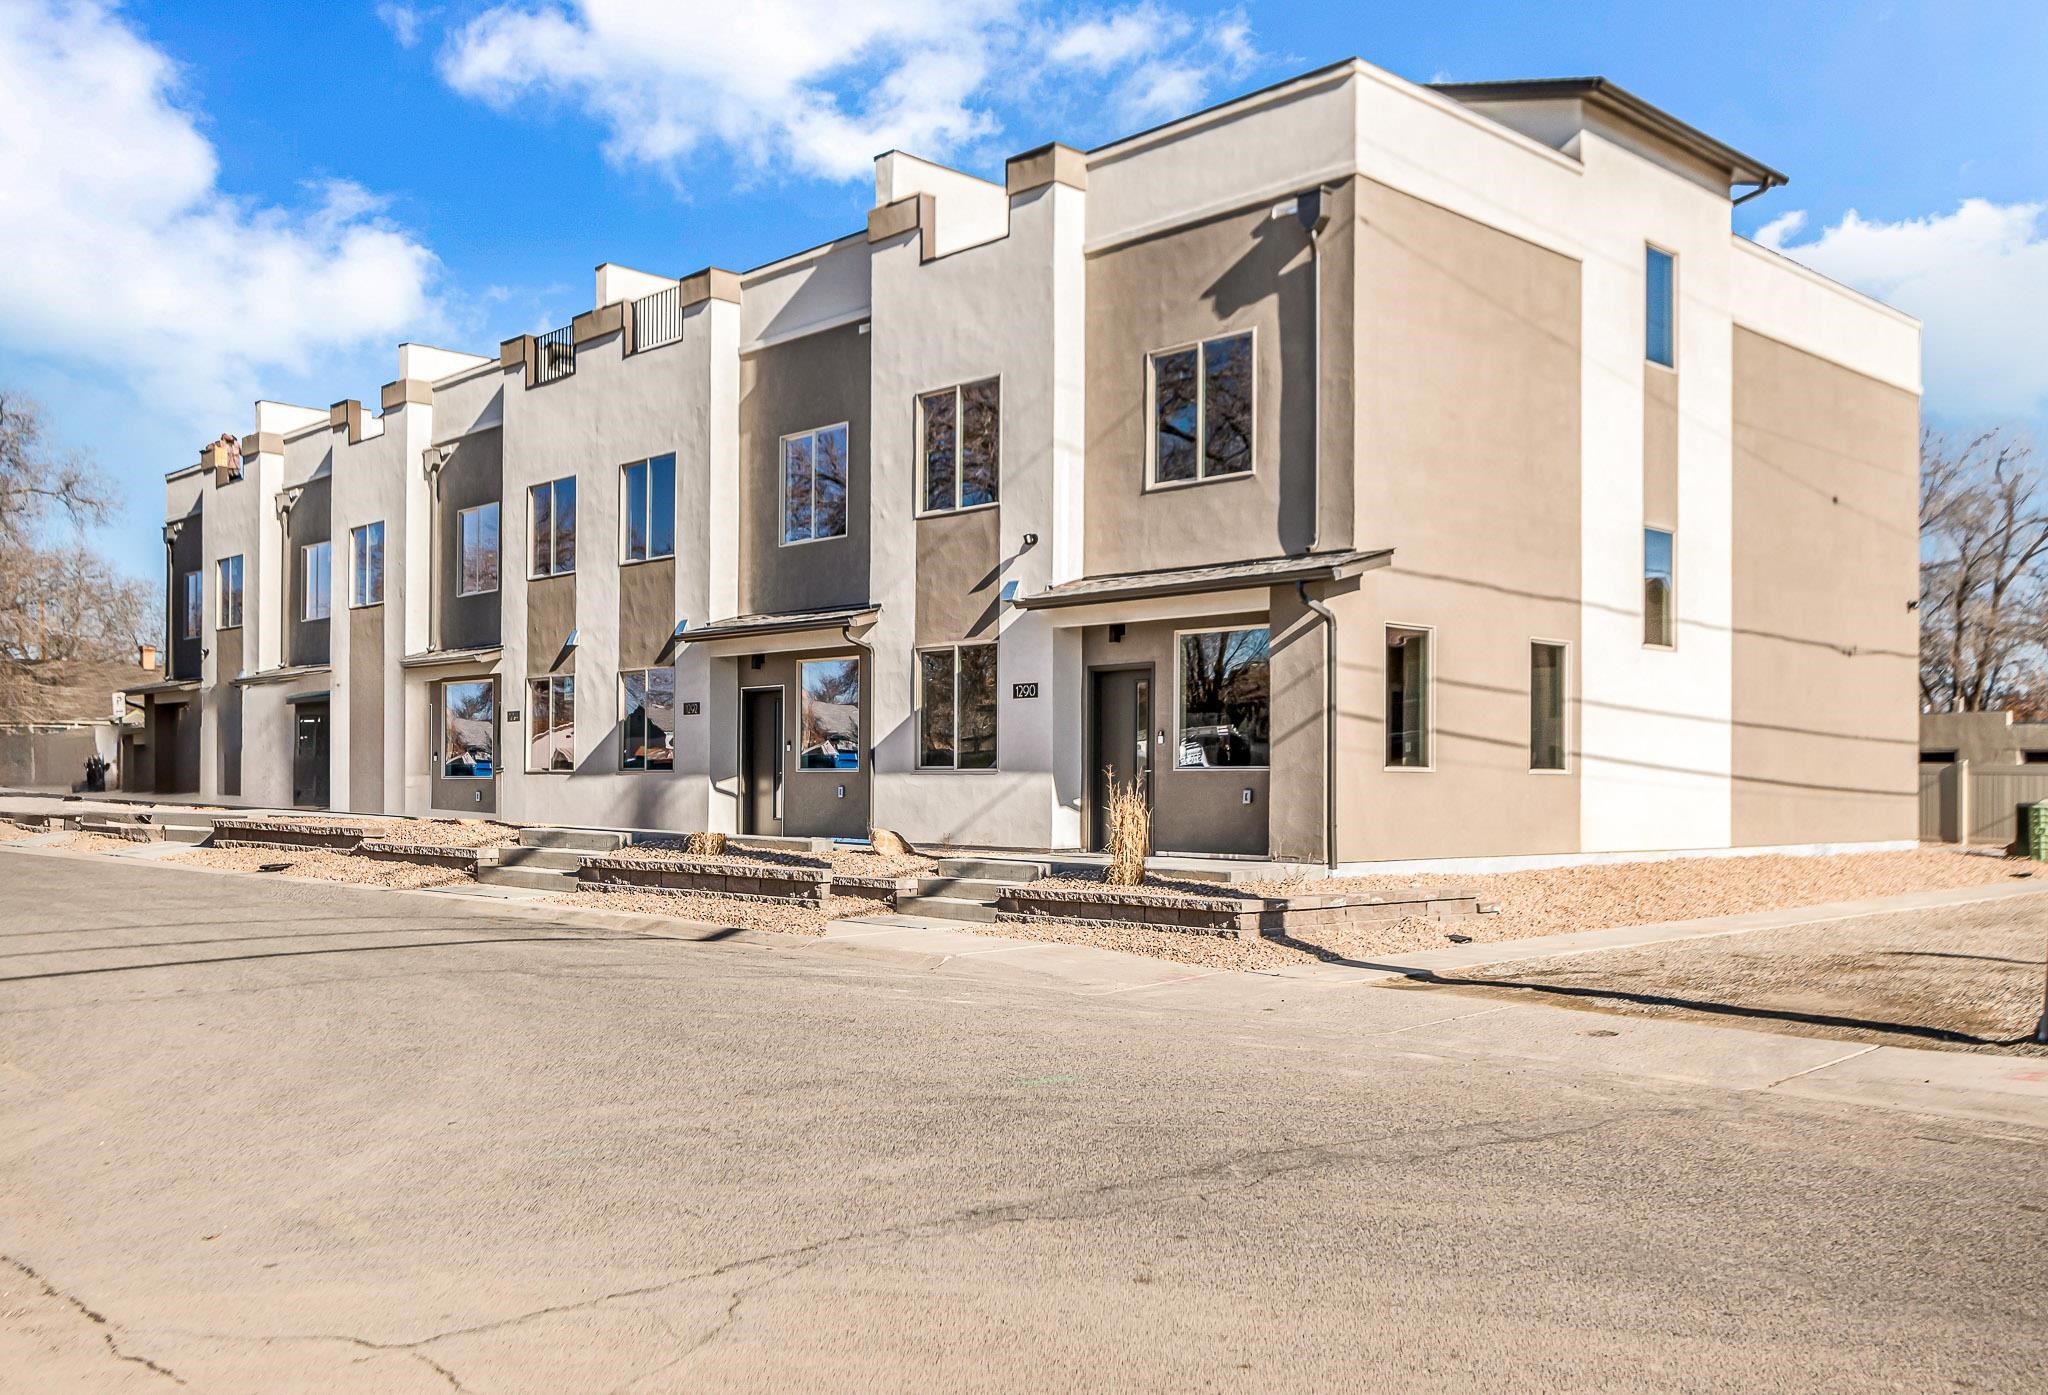 Looking for an easy investment property? Brand new townhouse complex. 3 units of a 5 unit complex. .1 miles (550 ft) from CMU, closer than some dorms! Each unit has 4 bed, 3 bath, 2 car attached garage with storage and rooftop deck at 1662 sq ft. Builder warranty for another year. 5.9% cap rate with a NOI of $96,000 for the 3 units.  Easy to maintain, HOA takes care of all landscaping and snow removal as well as the monthly bill for a DEDICATED 1G FIBER internet line to each unit. All units currently leased or signed and deposit received!! Superior Energy Efficiency - these townhouses are DOE Zero Energy Ready and Energy Star certified. No gas, no combustibles, fresh air fans, improved air quality, heat pump energy savers and all appliances!!! Offers must state; "Wendi Gechter, CO licensed Real Estate Agent, is also part Seller". Appraisal from last year shows the appraised value at $560K/unit, with $3000/monthly rent. Appraisal available upon request.  This is for units 1290, 1292 and 1298 Nth 13th Street